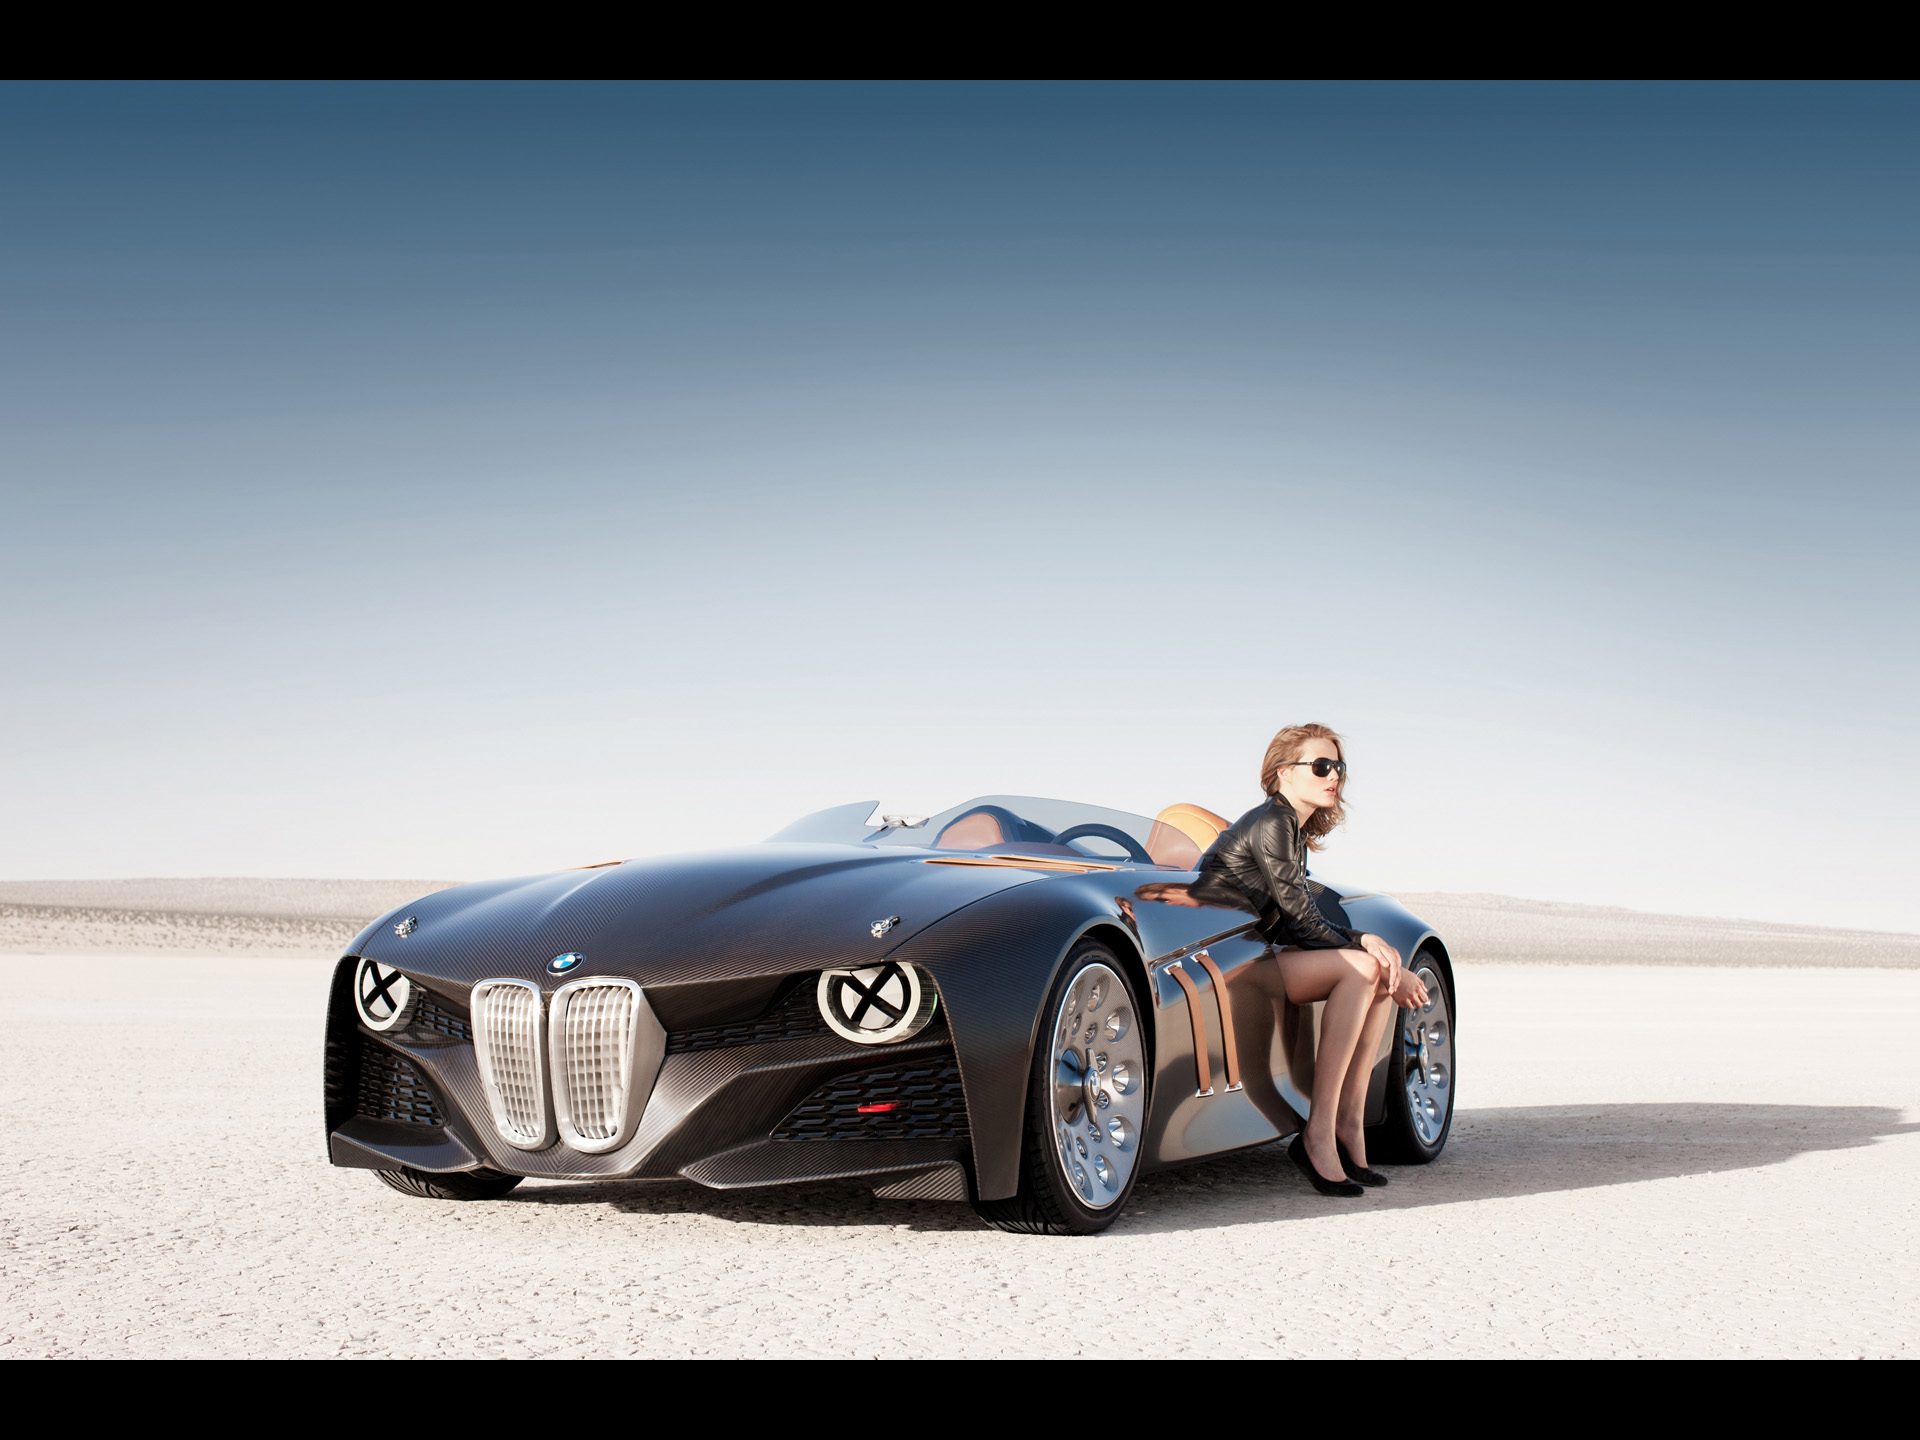 2011-BMW-328-Hommage-Front-Angle-Model-1920x1440.jpg